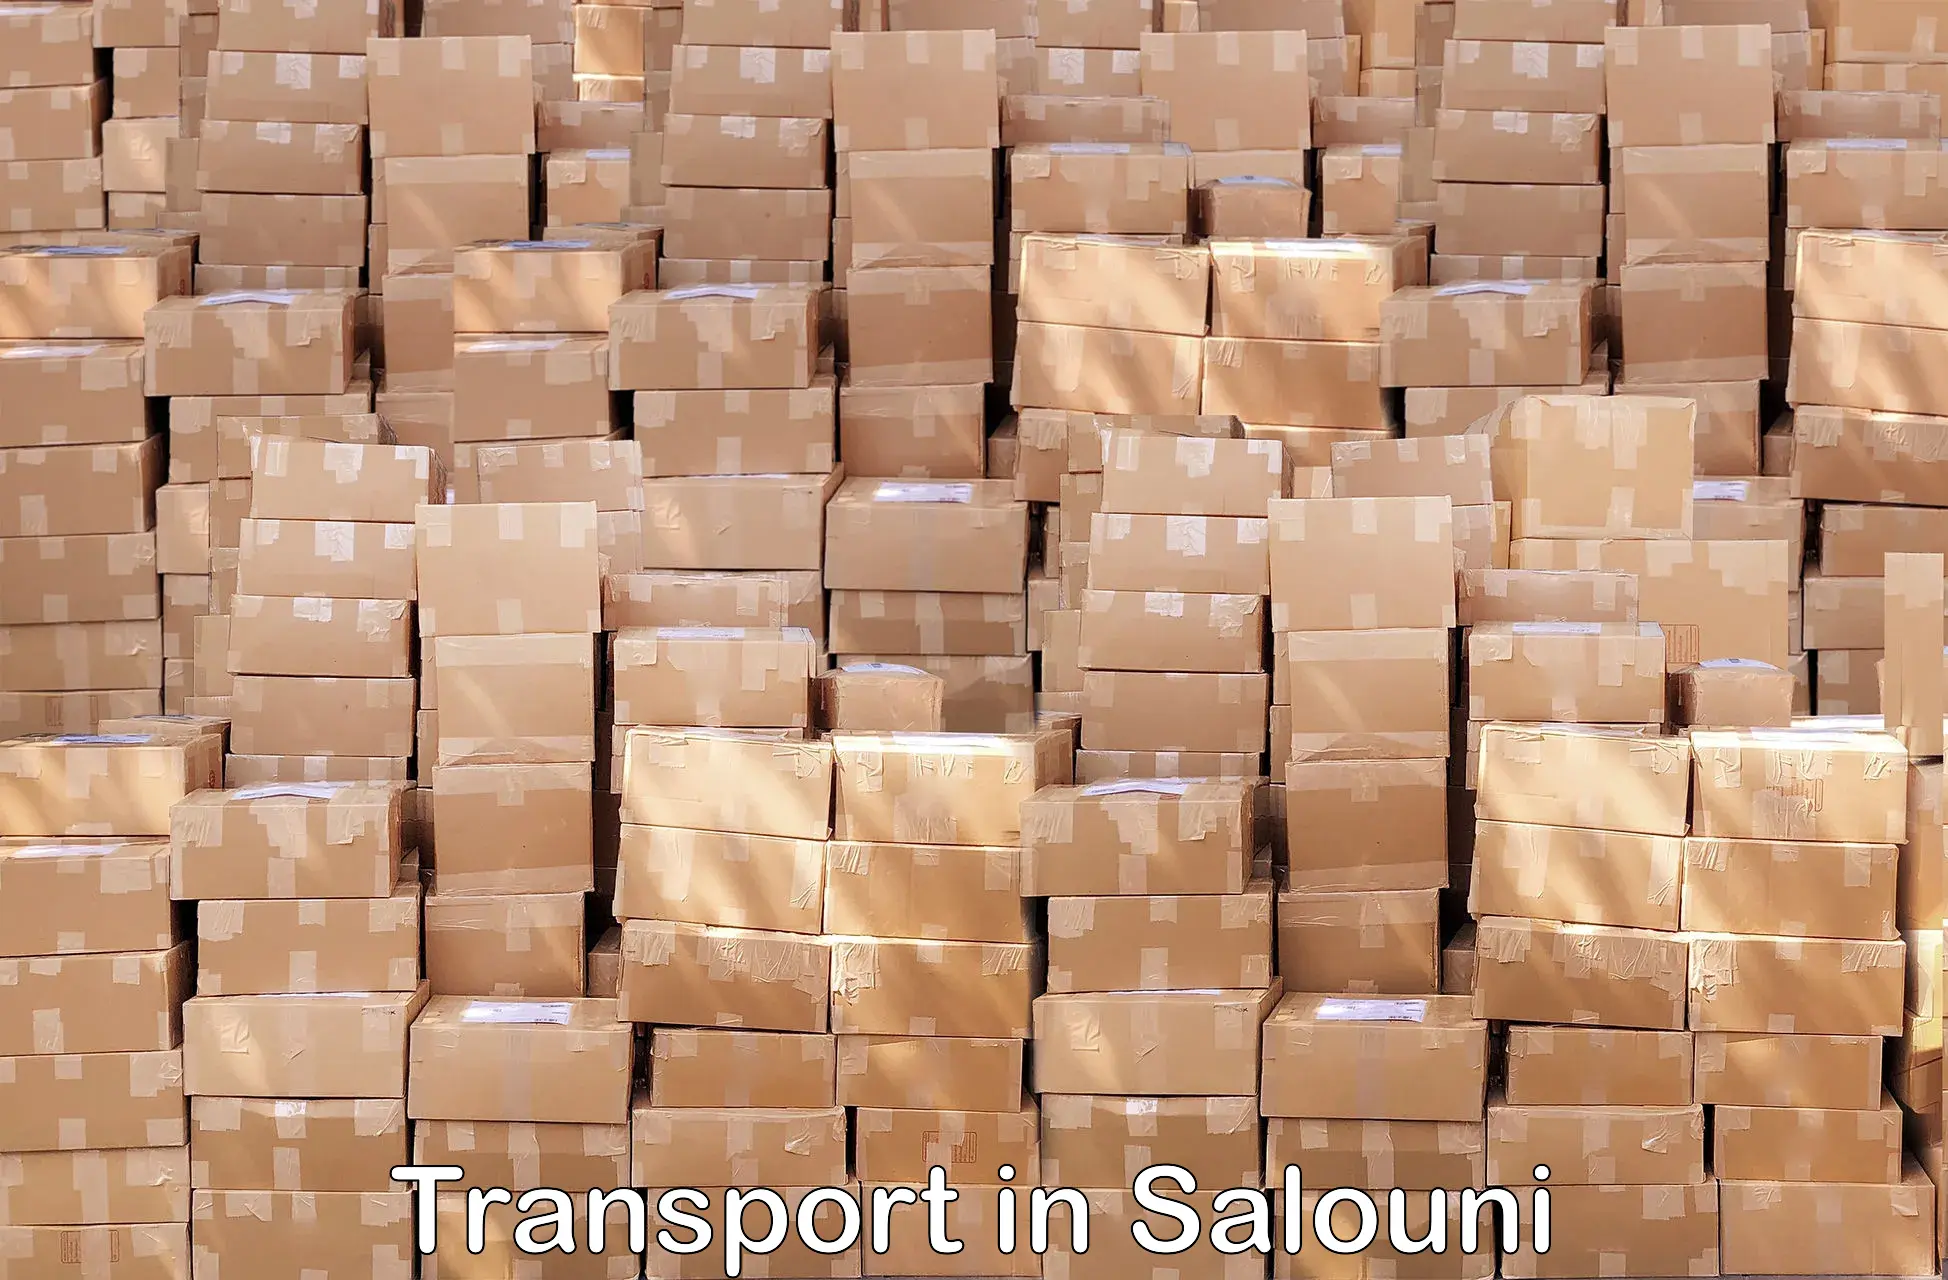 Container transportation services in Salouni